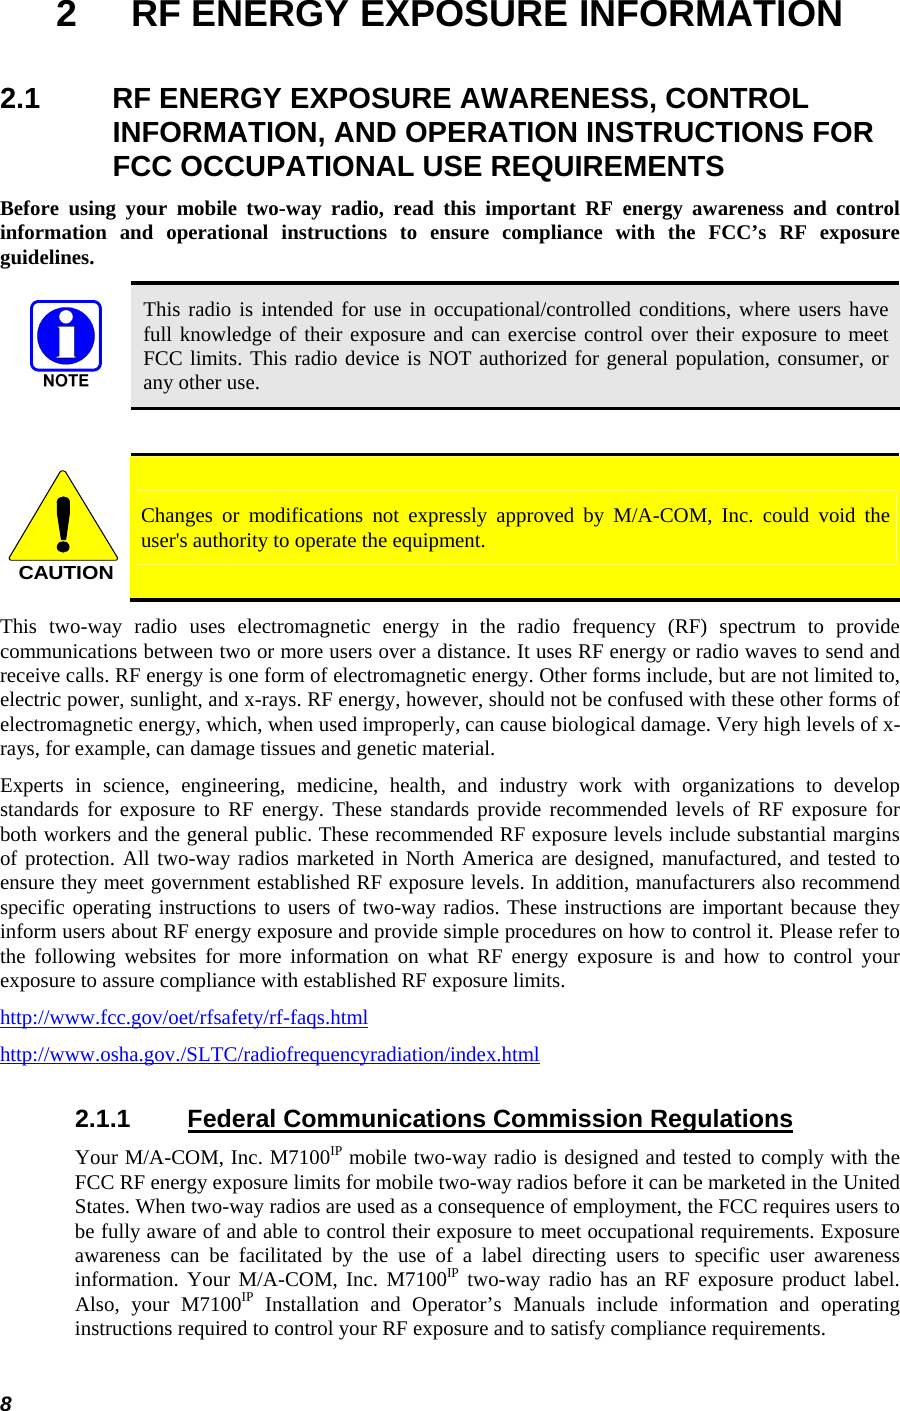  8 2  RF ENERGY EXPOSURE INFORMATION 2.1  RF ENERGY EXPOSURE AWARENESS, CONTROL INFORMATION, AND OPERATION INSTRUCTIONS FOR FCC OCCUPATIONAL USE REQUIREMENTS Before using your mobile two-way radio, read this important RF energy awareness and control information and operational instructions to ensure compliance with the FCC’s RF exposure guidelines.  This radio is intended for use in occupational/controlled conditions, where users have full knowledge of their exposure and can exercise control over their exposure to meet FCC limits. This radio device is NOT authorized for general population, consumer, or any other use.  CAUTION Changes or modifications not expressly approved by M/A-COM, Inc. could void the user&apos;s authority to operate the equipment. This two-way radio uses electromagnetic energy in the radio frequency (RF) spectrum to provide communications between two or more users over a distance. It uses RF energy or radio waves to send and receive calls. RF energy is one form of electromagnetic energy. Other forms include, but are not limited to, electric power, sunlight, and x-rays. RF energy, however, should not be confused with these other forms of electromagnetic energy, which, when used improperly, can cause biological damage. Very high levels of x-rays, for example, can damage tissues and genetic material. Experts in science, engineering, medicine, health, and industry work with organizations to develop standards for exposure to RF energy. These standards provide recommended levels of RF exposure for both workers and the general public. These recommended RF exposure levels include substantial margins of protection. All two-way radios marketed in North America are designed, manufactured, and tested to ensure they meet government established RF exposure levels. In addition, manufacturers also recommend specific operating instructions to users of two-way radios. These instructions are important because they inform users about RF energy exposure and provide simple procedures on how to control it. Please refer to the following websites for more information on what RF energy exposure is and how to control your exposure to assure compliance with established RF exposure limits. http://www.fcc.gov/oet/rfsafety/rf-faqs.html http://www.osha.gov./SLTC/radiofrequencyradiation/index.html 2.1.1 Federal Communications Commission Regulations Your M/A-COM, Inc. M7100IP mobile two-way radio is designed and tested to comply with the FCC RF energy exposure limits for mobile two-way radios before it can be marketed in the United States. When two-way radios are used as a consequence of employment, the FCC requires users to be fully aware of and able to control their exposure to meet occupational requirements. Exposure awareness can be facilitated by the use of a label directing users to specific user awareness information. Your M/A-COM, Inc. M7100IP two-way radio has an RF exposure product label. Also, your M7100IP Installation and Operator’s Manuals include information and operating instructions required to control your RF exposure and to satisfy compliance requirements. 